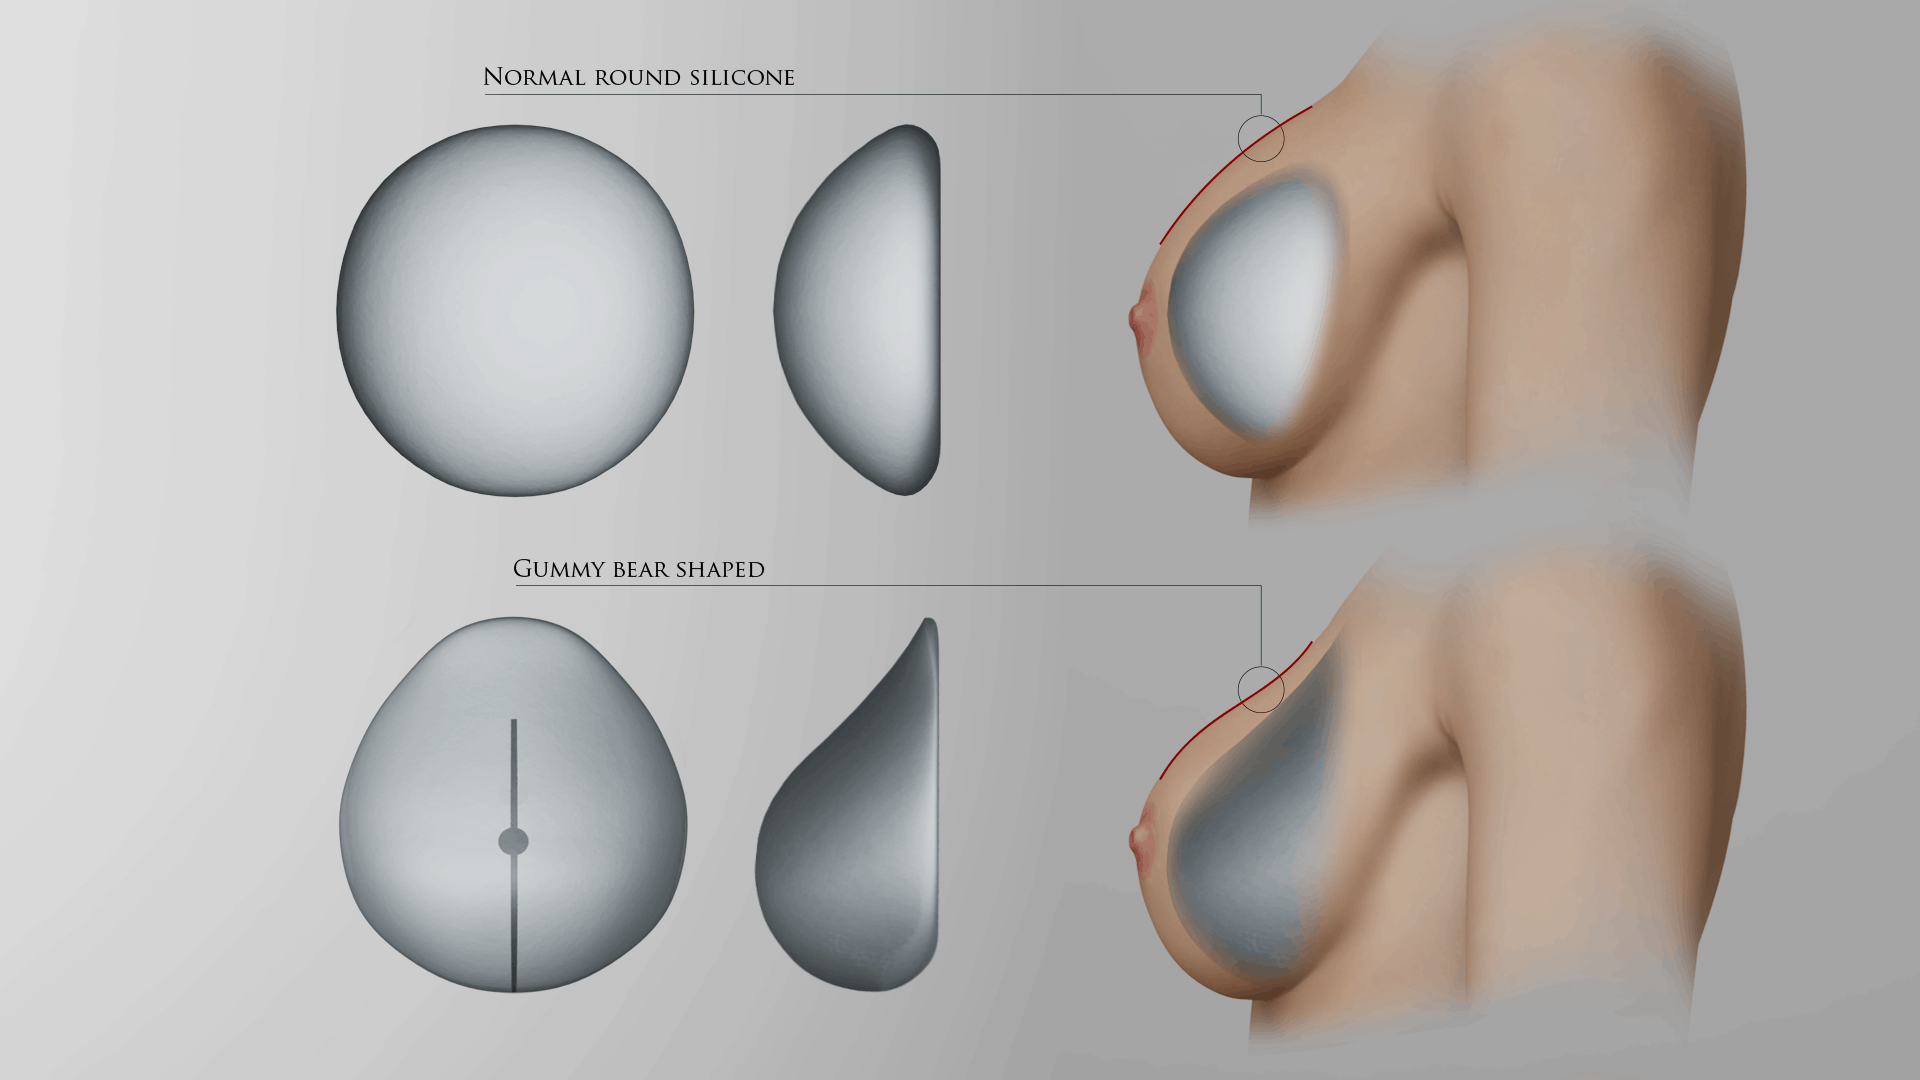 Normal round silicone breast implant and gummy bear shaped implant.